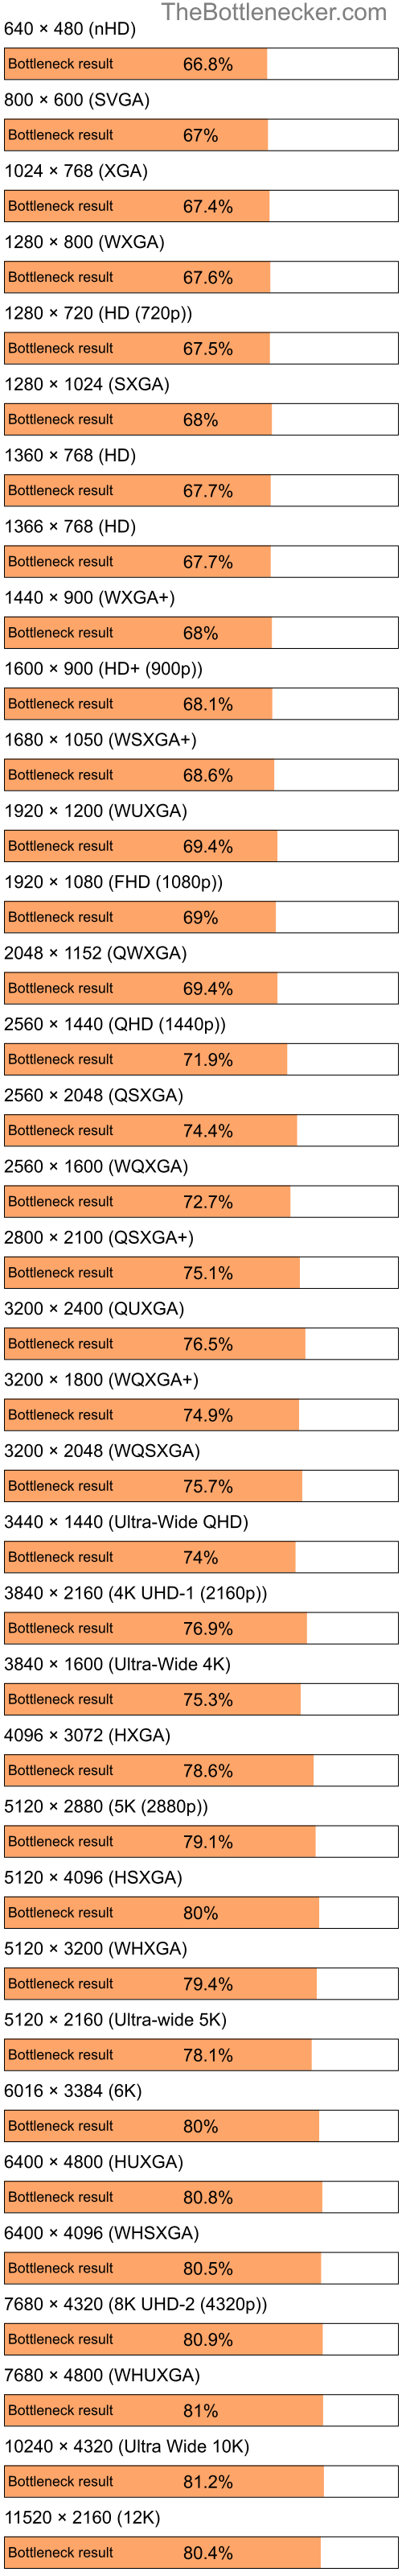 Bottleneck results by resolution for Intel Pentium 4 and NVIDIA nForce 720a in General Tasks